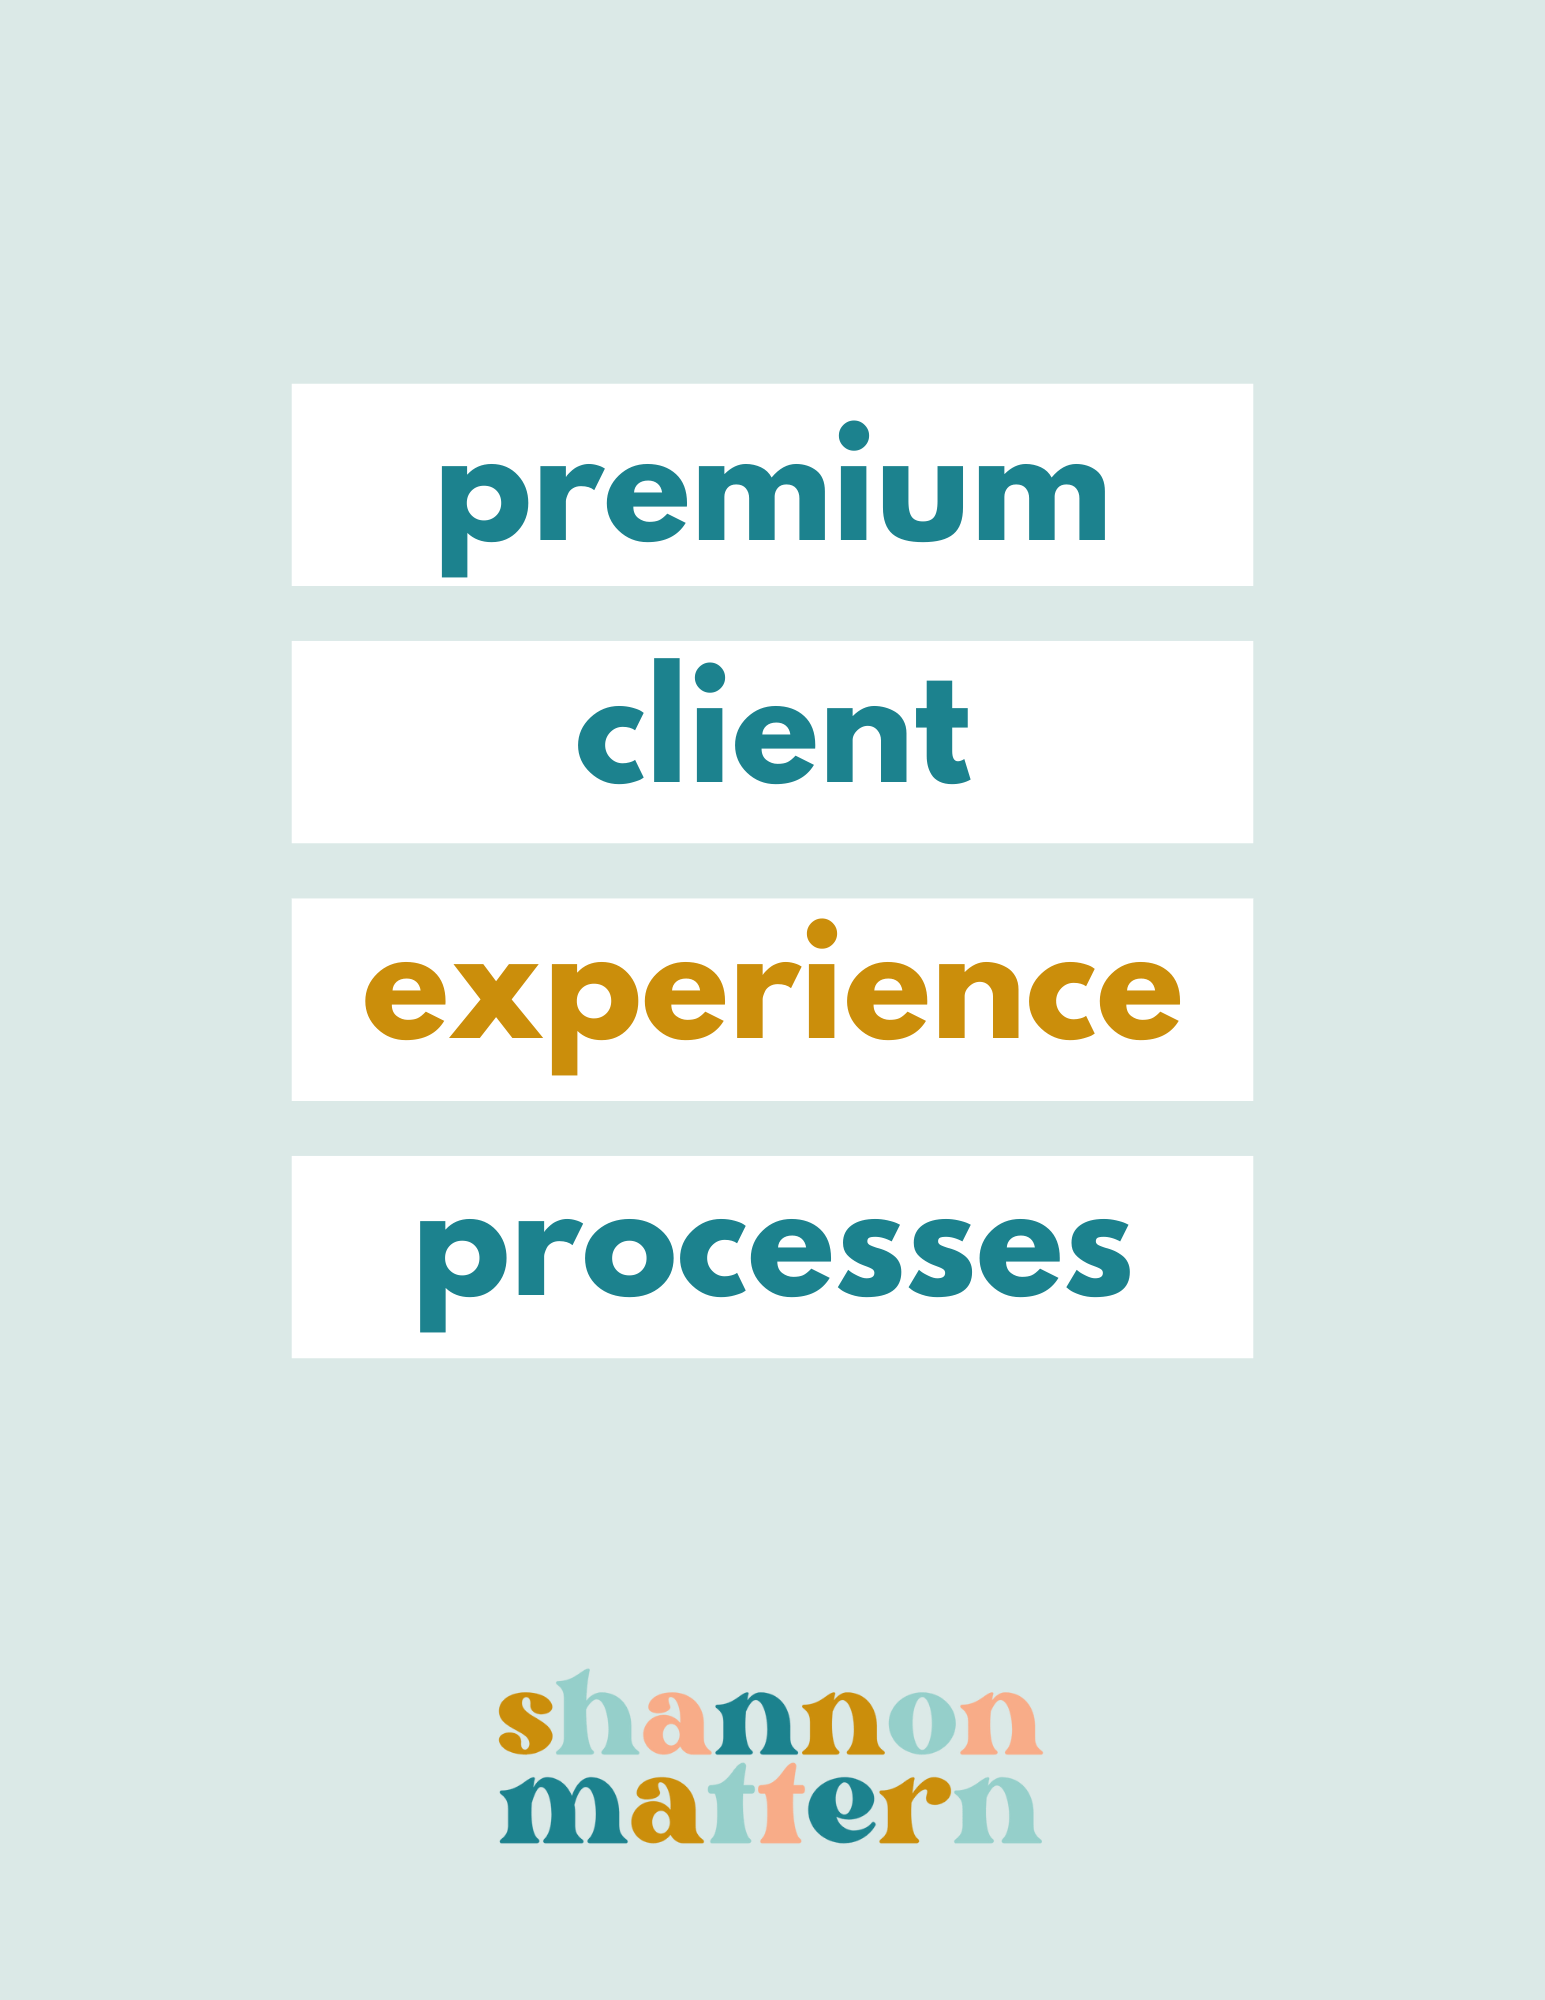 Shannon Mattern is demonstrating processes for providing a premium client experience. Full Text: premium client experience processes shannon mattern